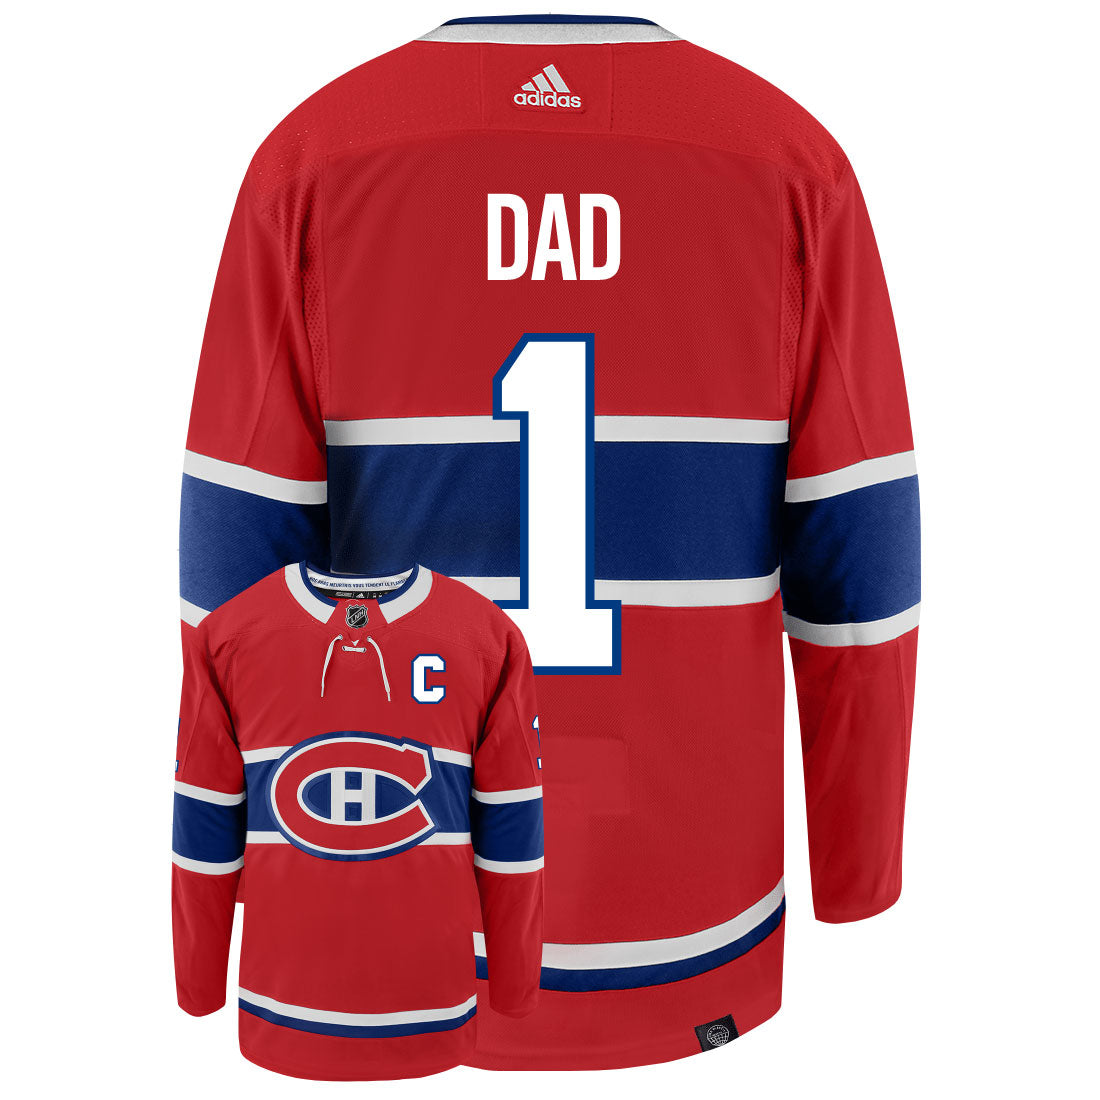 Montreal Canadiens Dad Number One Adidas Primegreen Authentic NHL Hockey  Jersey